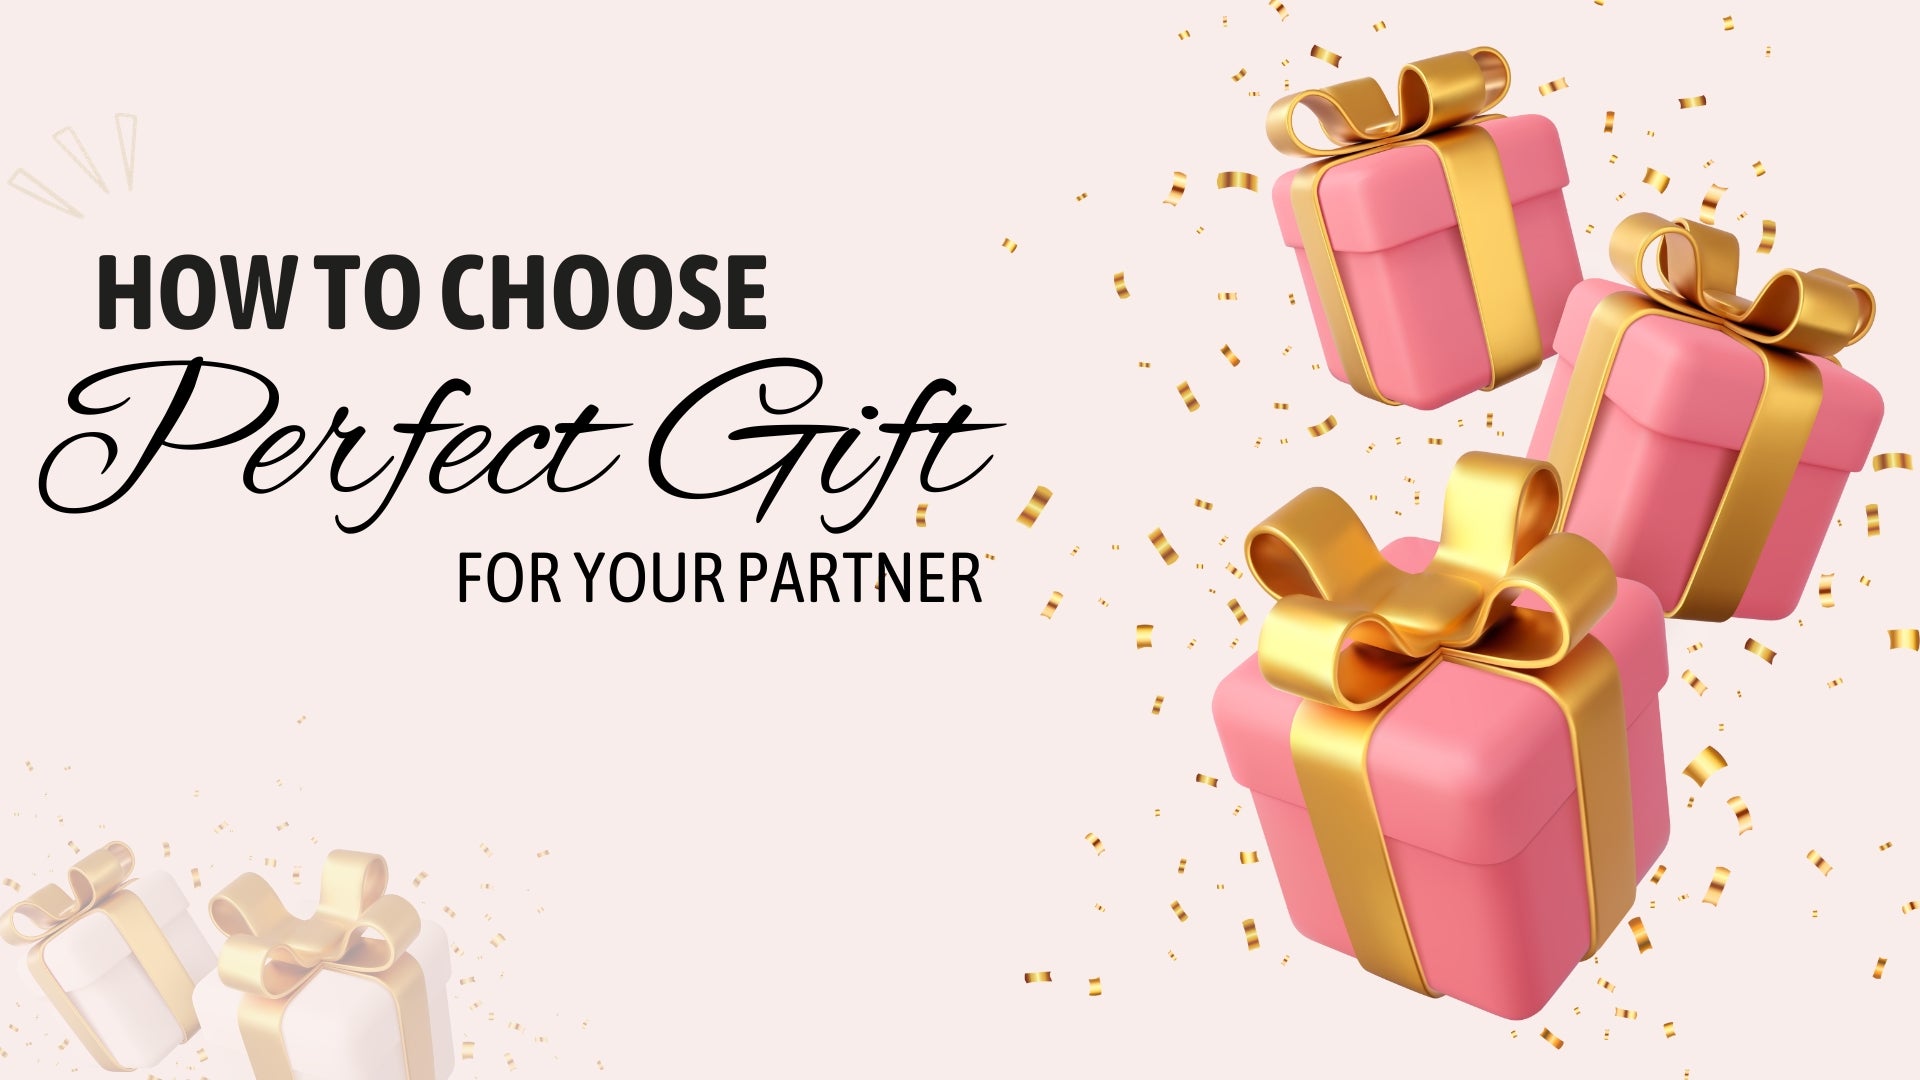 How to Choose the Best Gift for Your Girlfriend - PairedLife